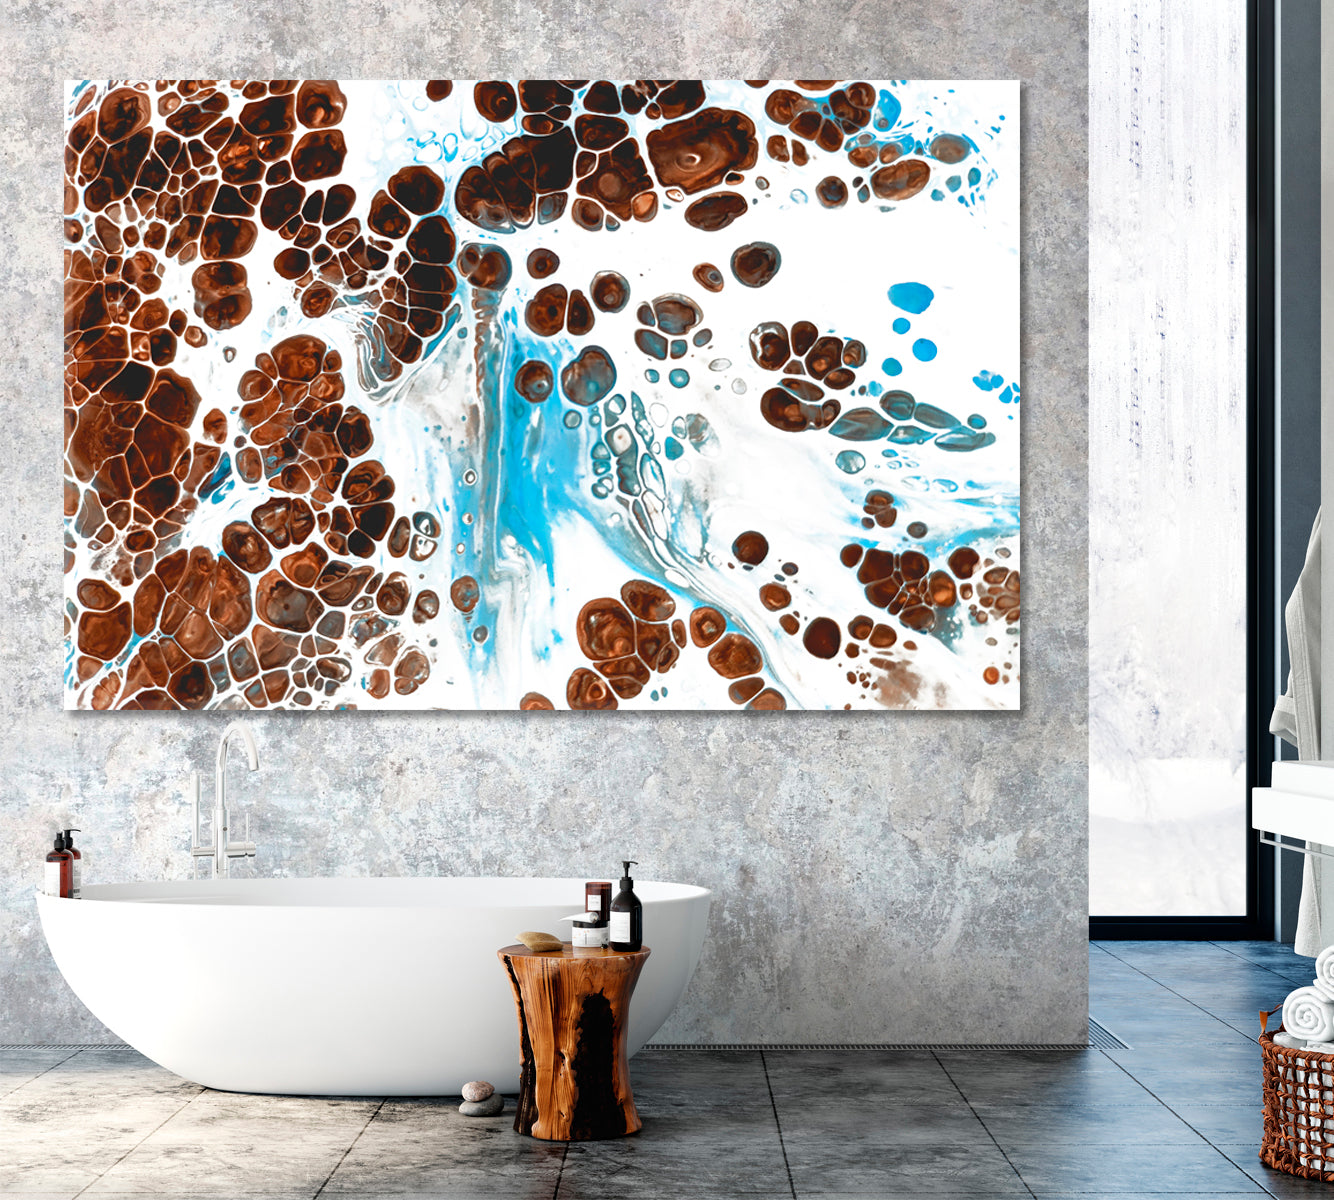 Abstract Bubbles on Liquid Acrylic Paint Canvas Print ArtLexy 1 Panel 24"x16" inches 